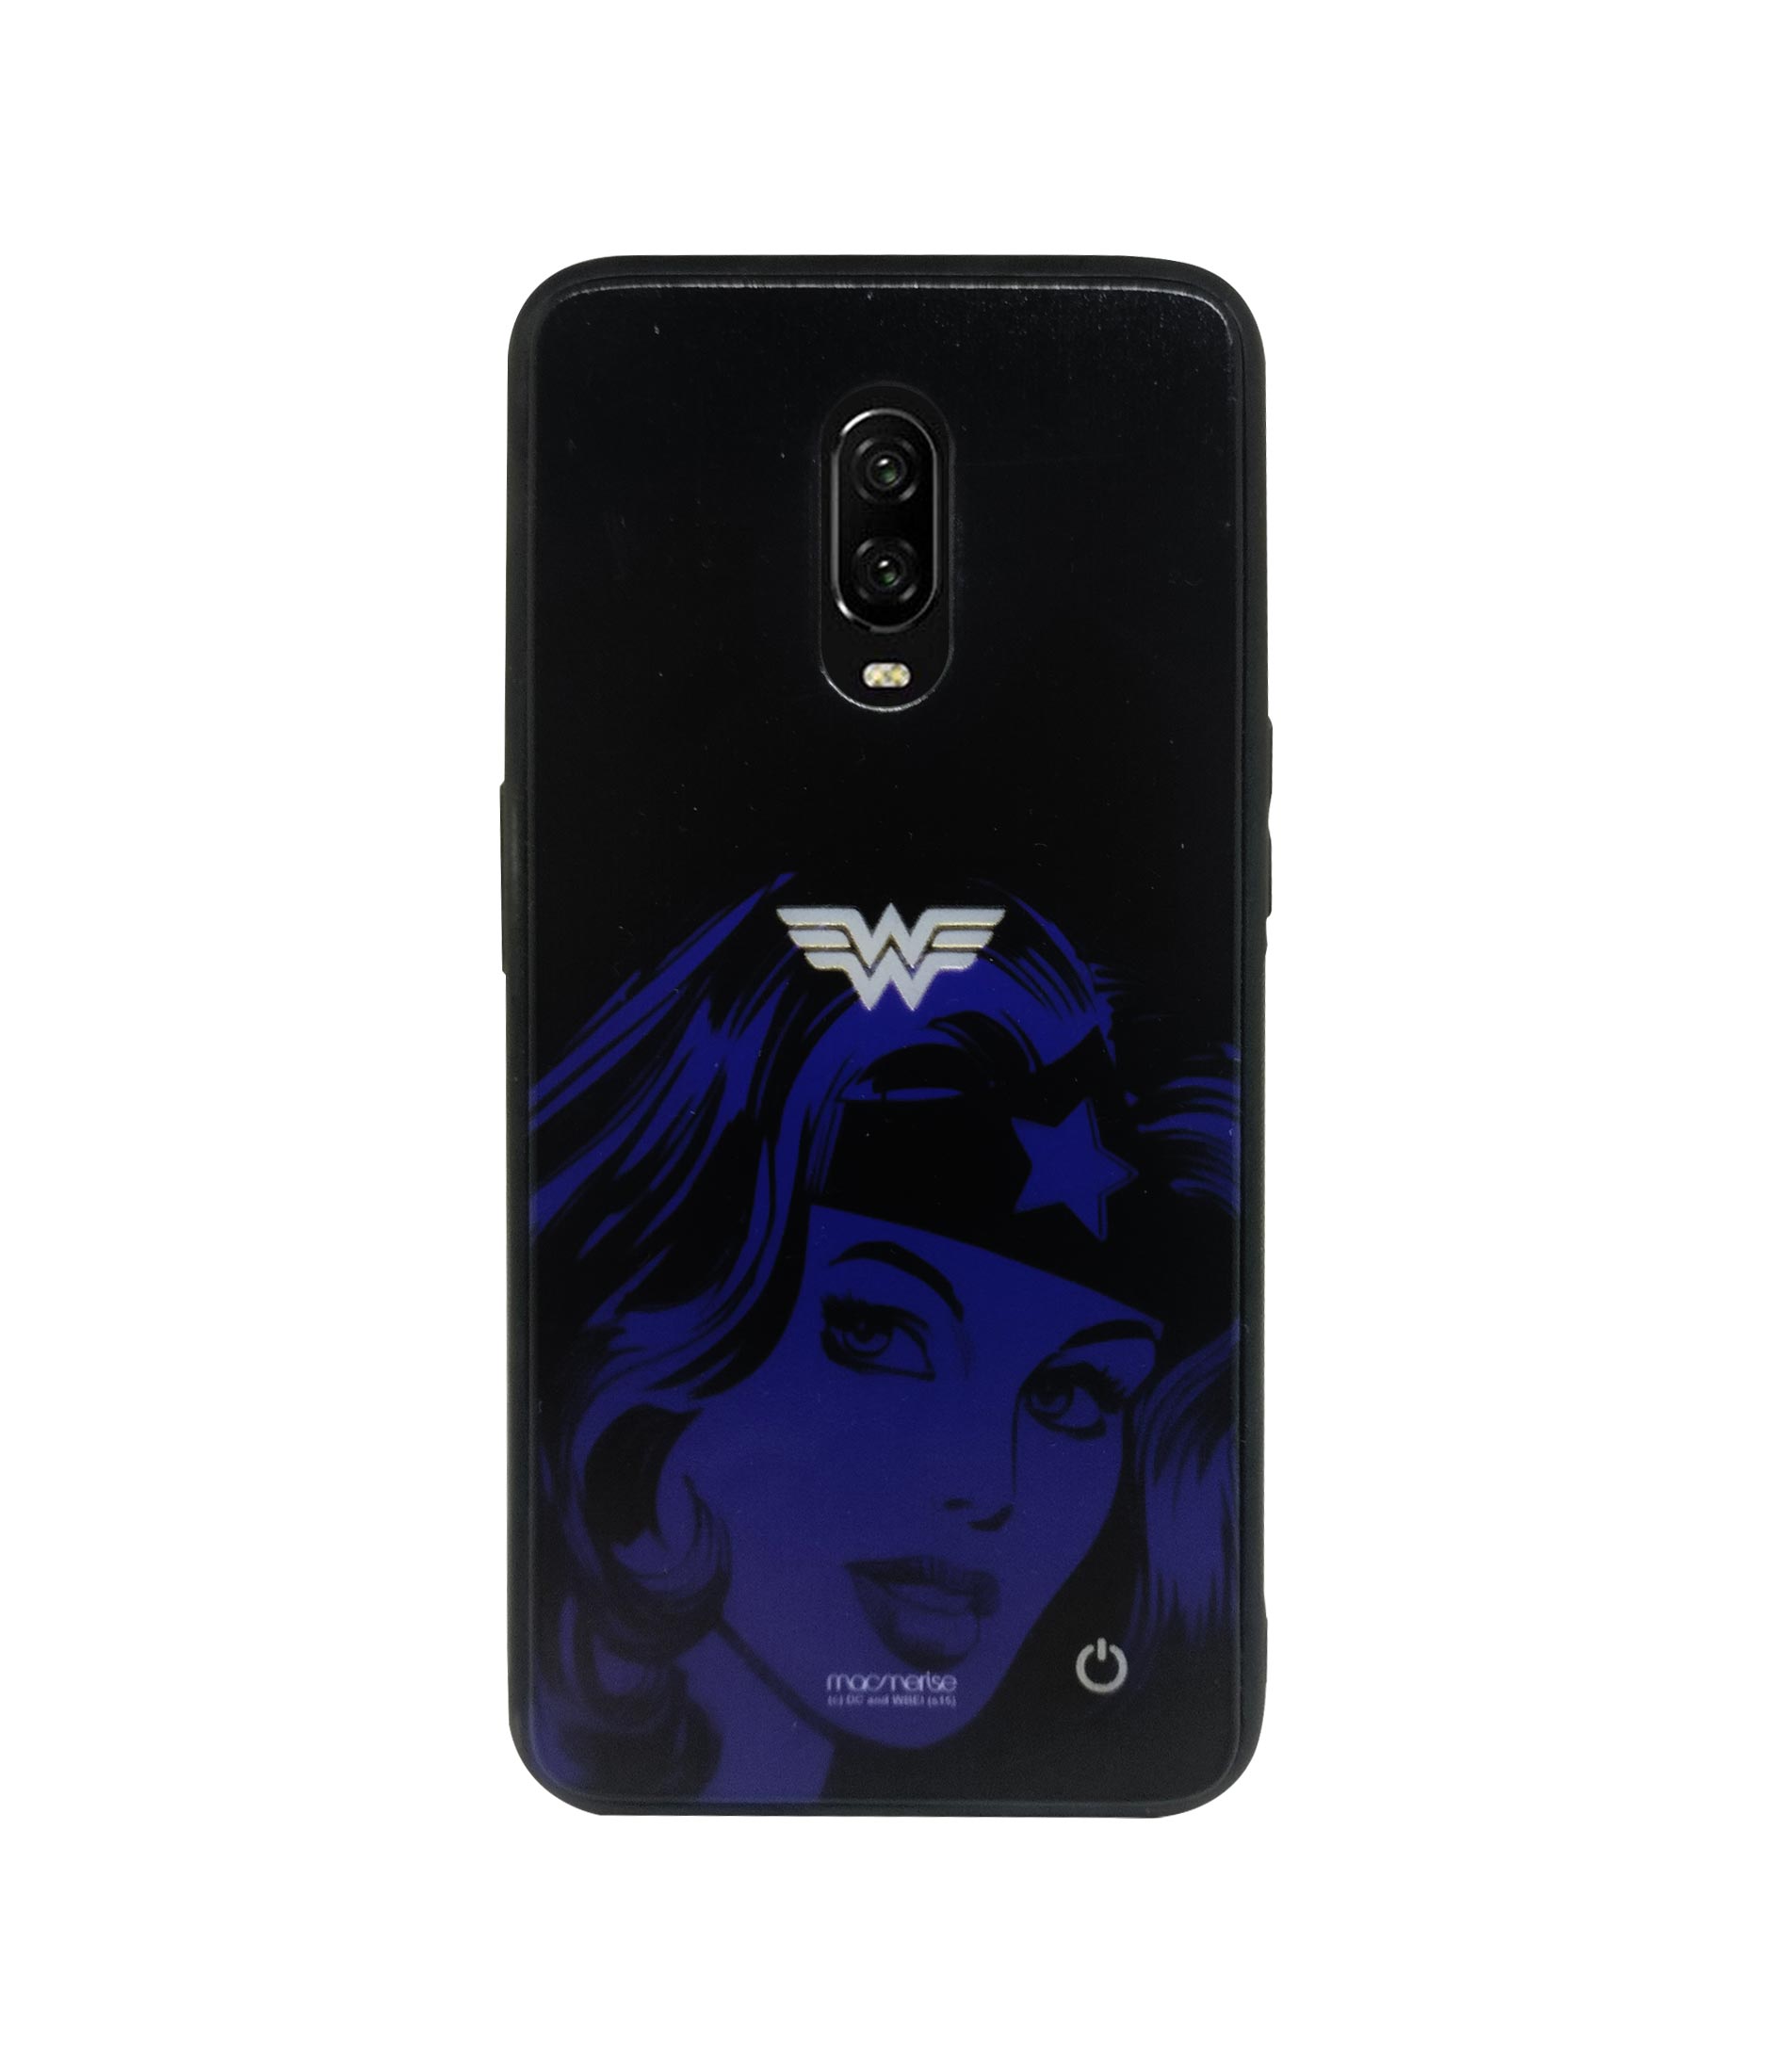 Silhouette Wonder Woman - Lumous LED Phone Case for OnePlus 6T